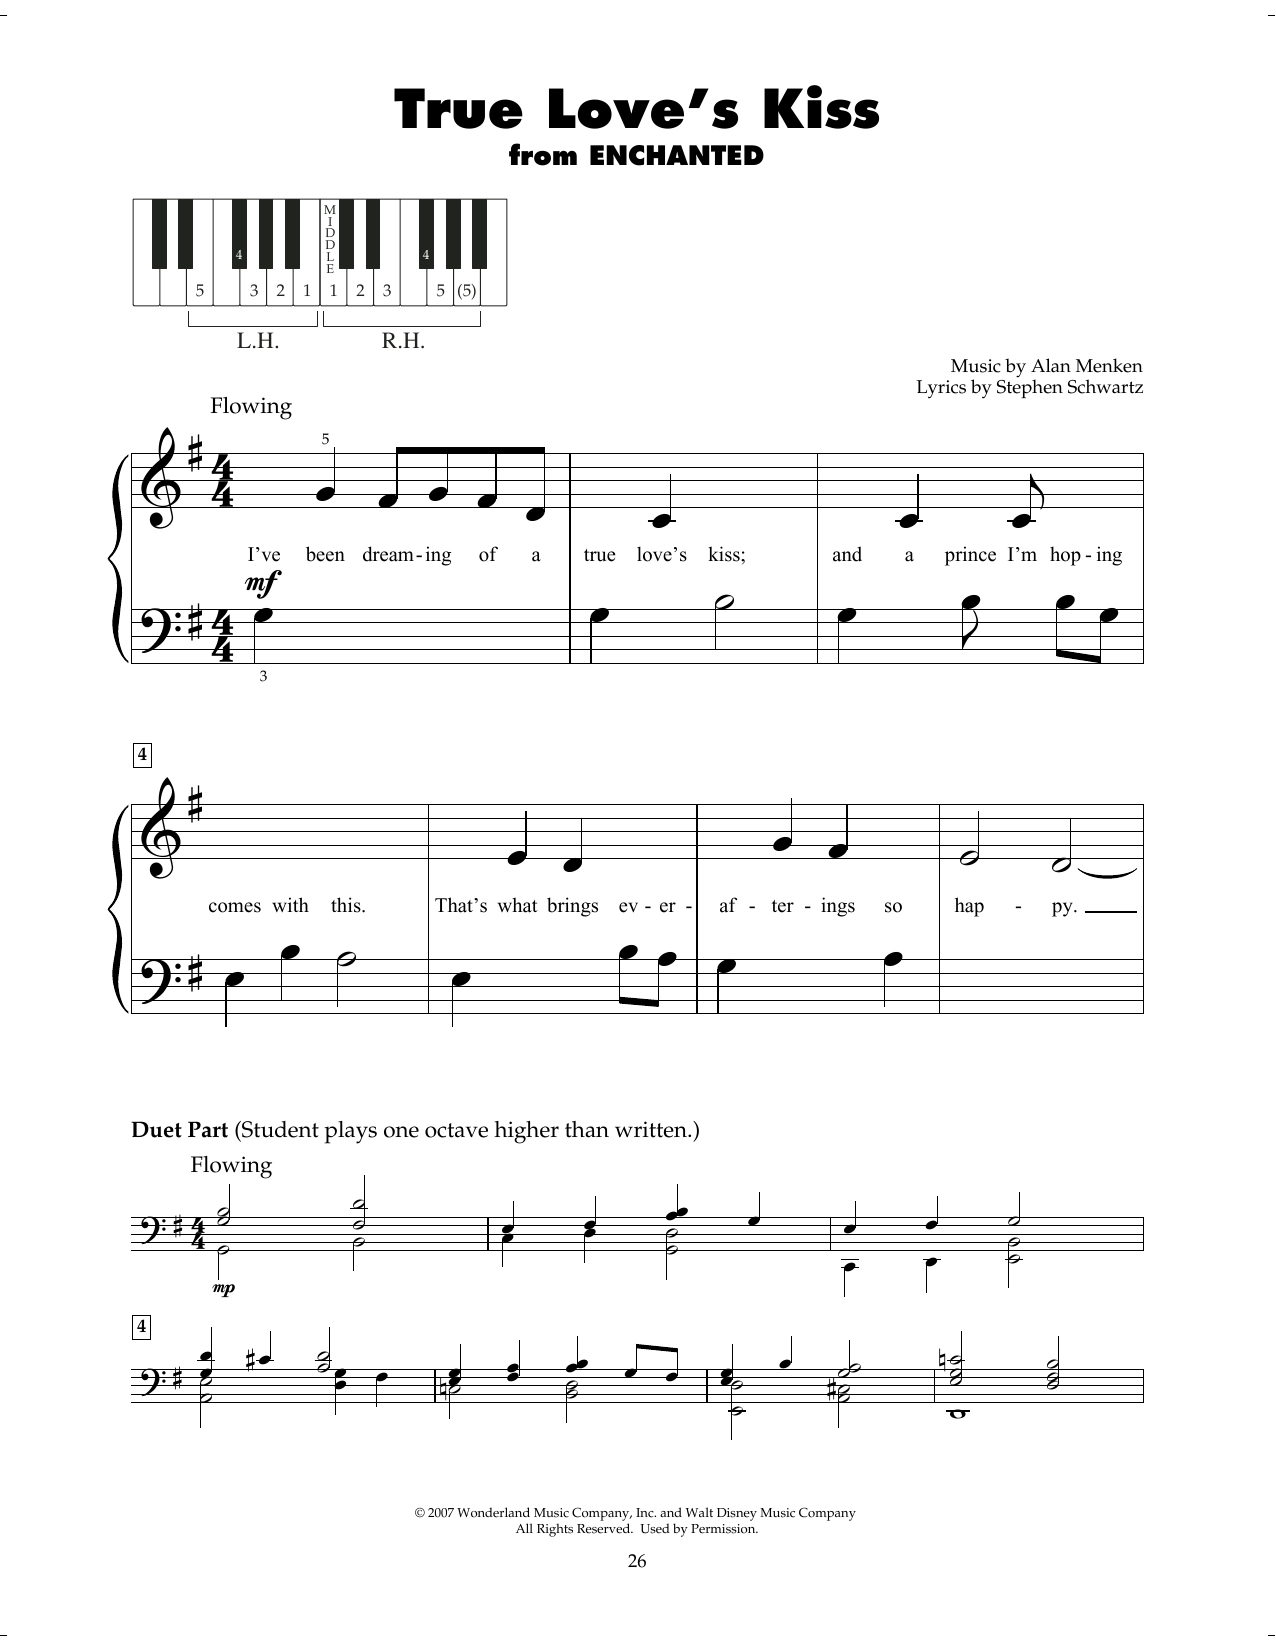 Amy Adams True Love's Kiss (from Enchanted) sheet music notes printable PDF score